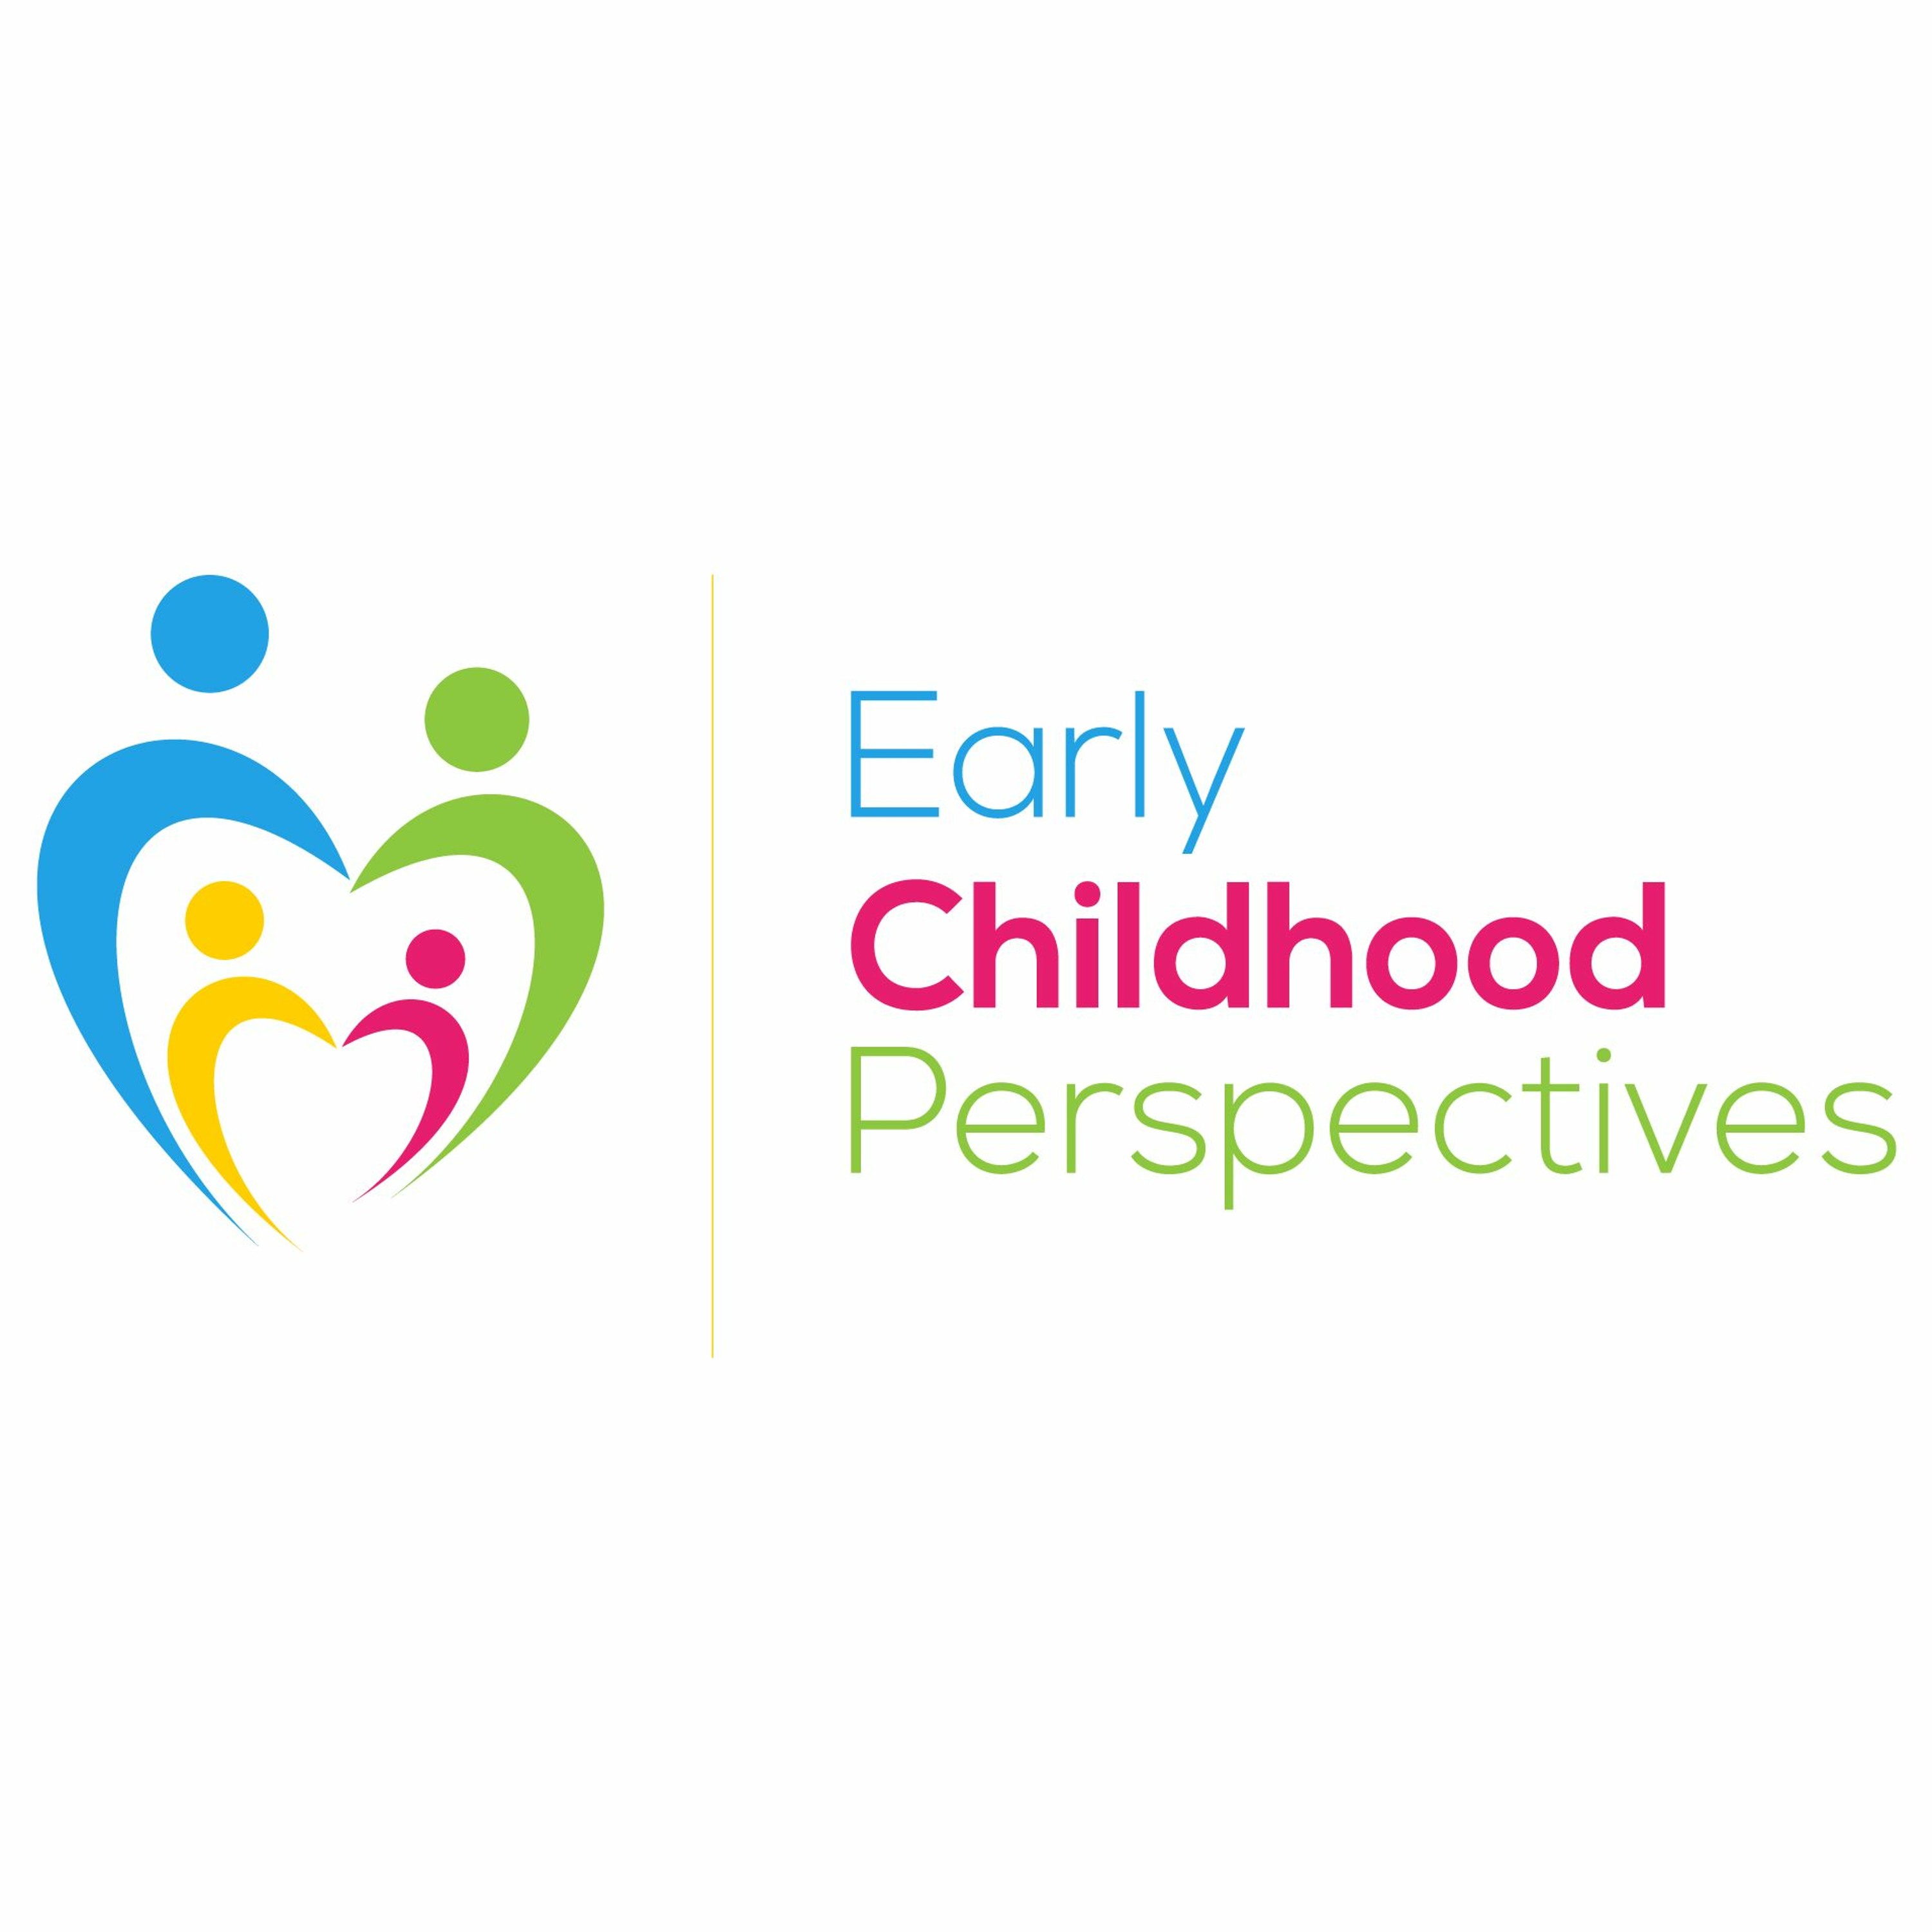 Early Childhood Perspectives #27: Early Childhood and Christmas